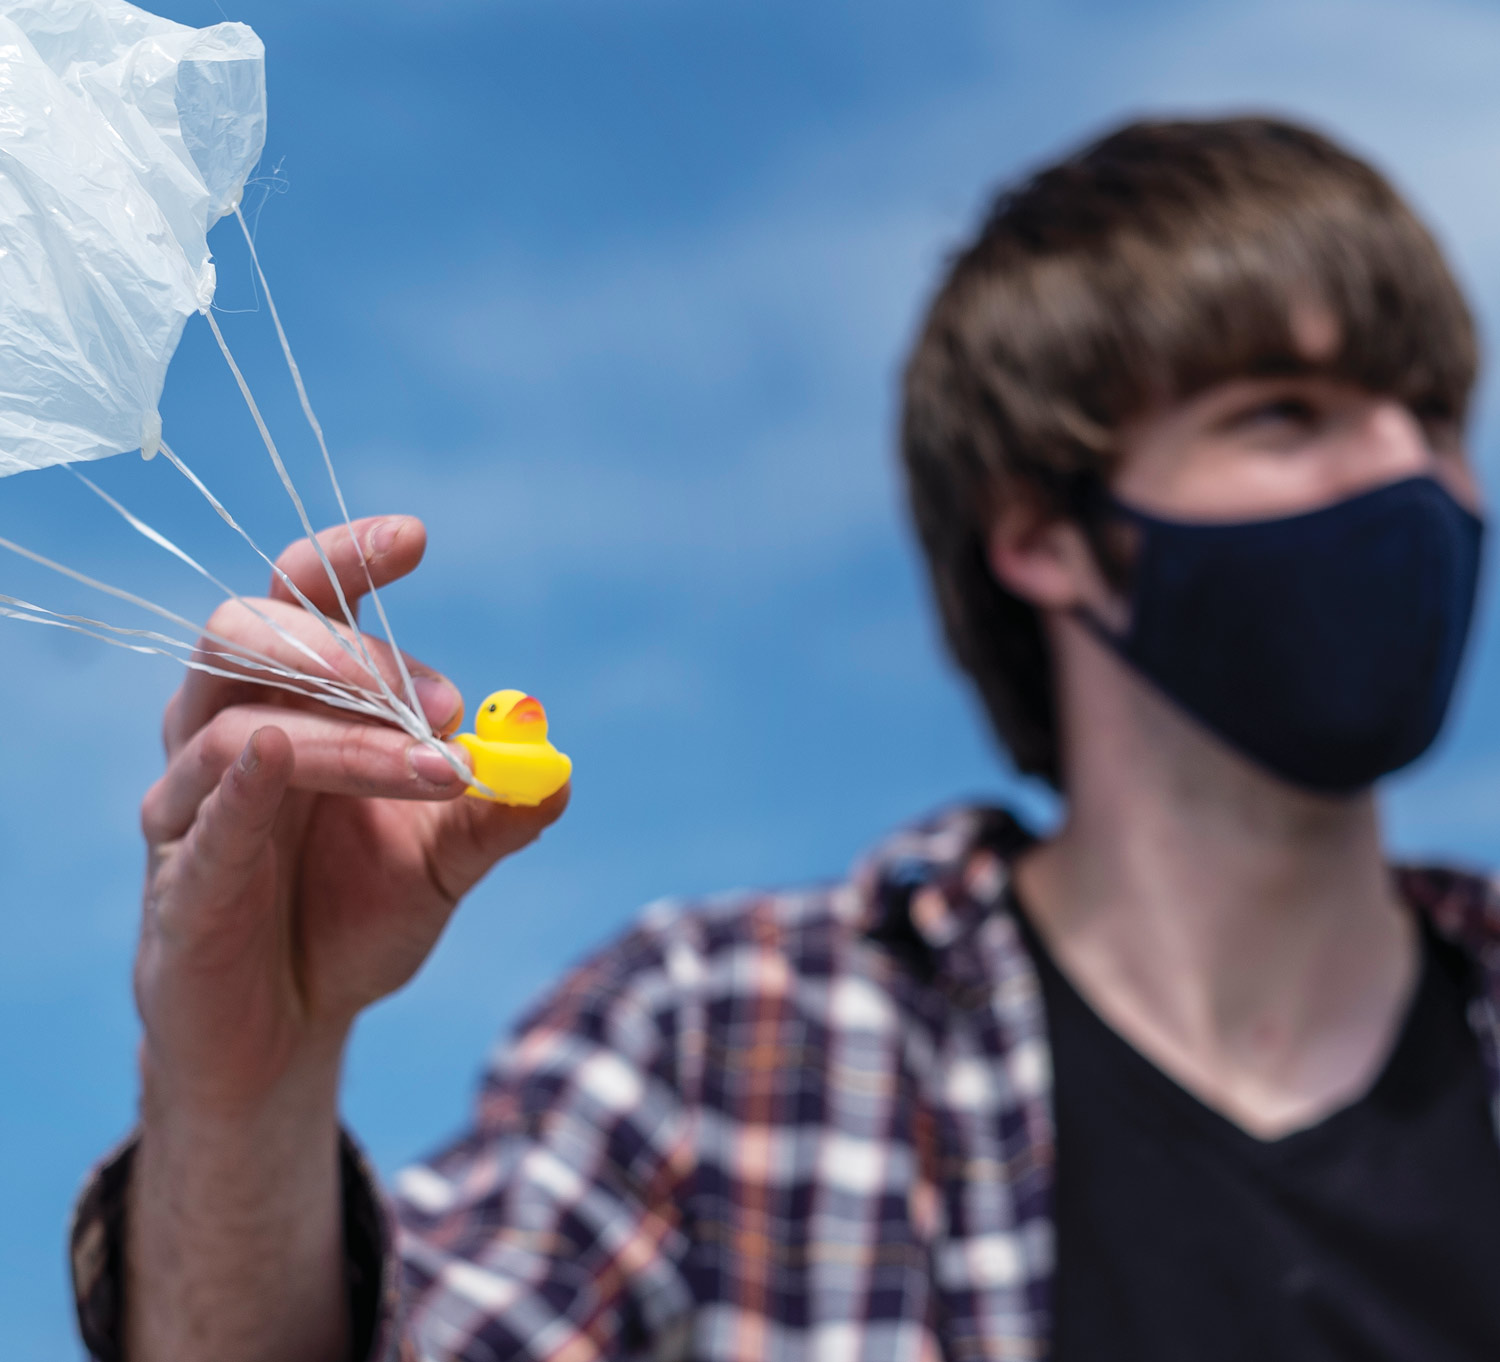 Zane Meyer wearing a black V-neck T-shirt, a flannel button-down, and a black facemask, holding a small, yellow rubber duck that has a plastic parachute attached to it. Behind them is a bright blue sky.